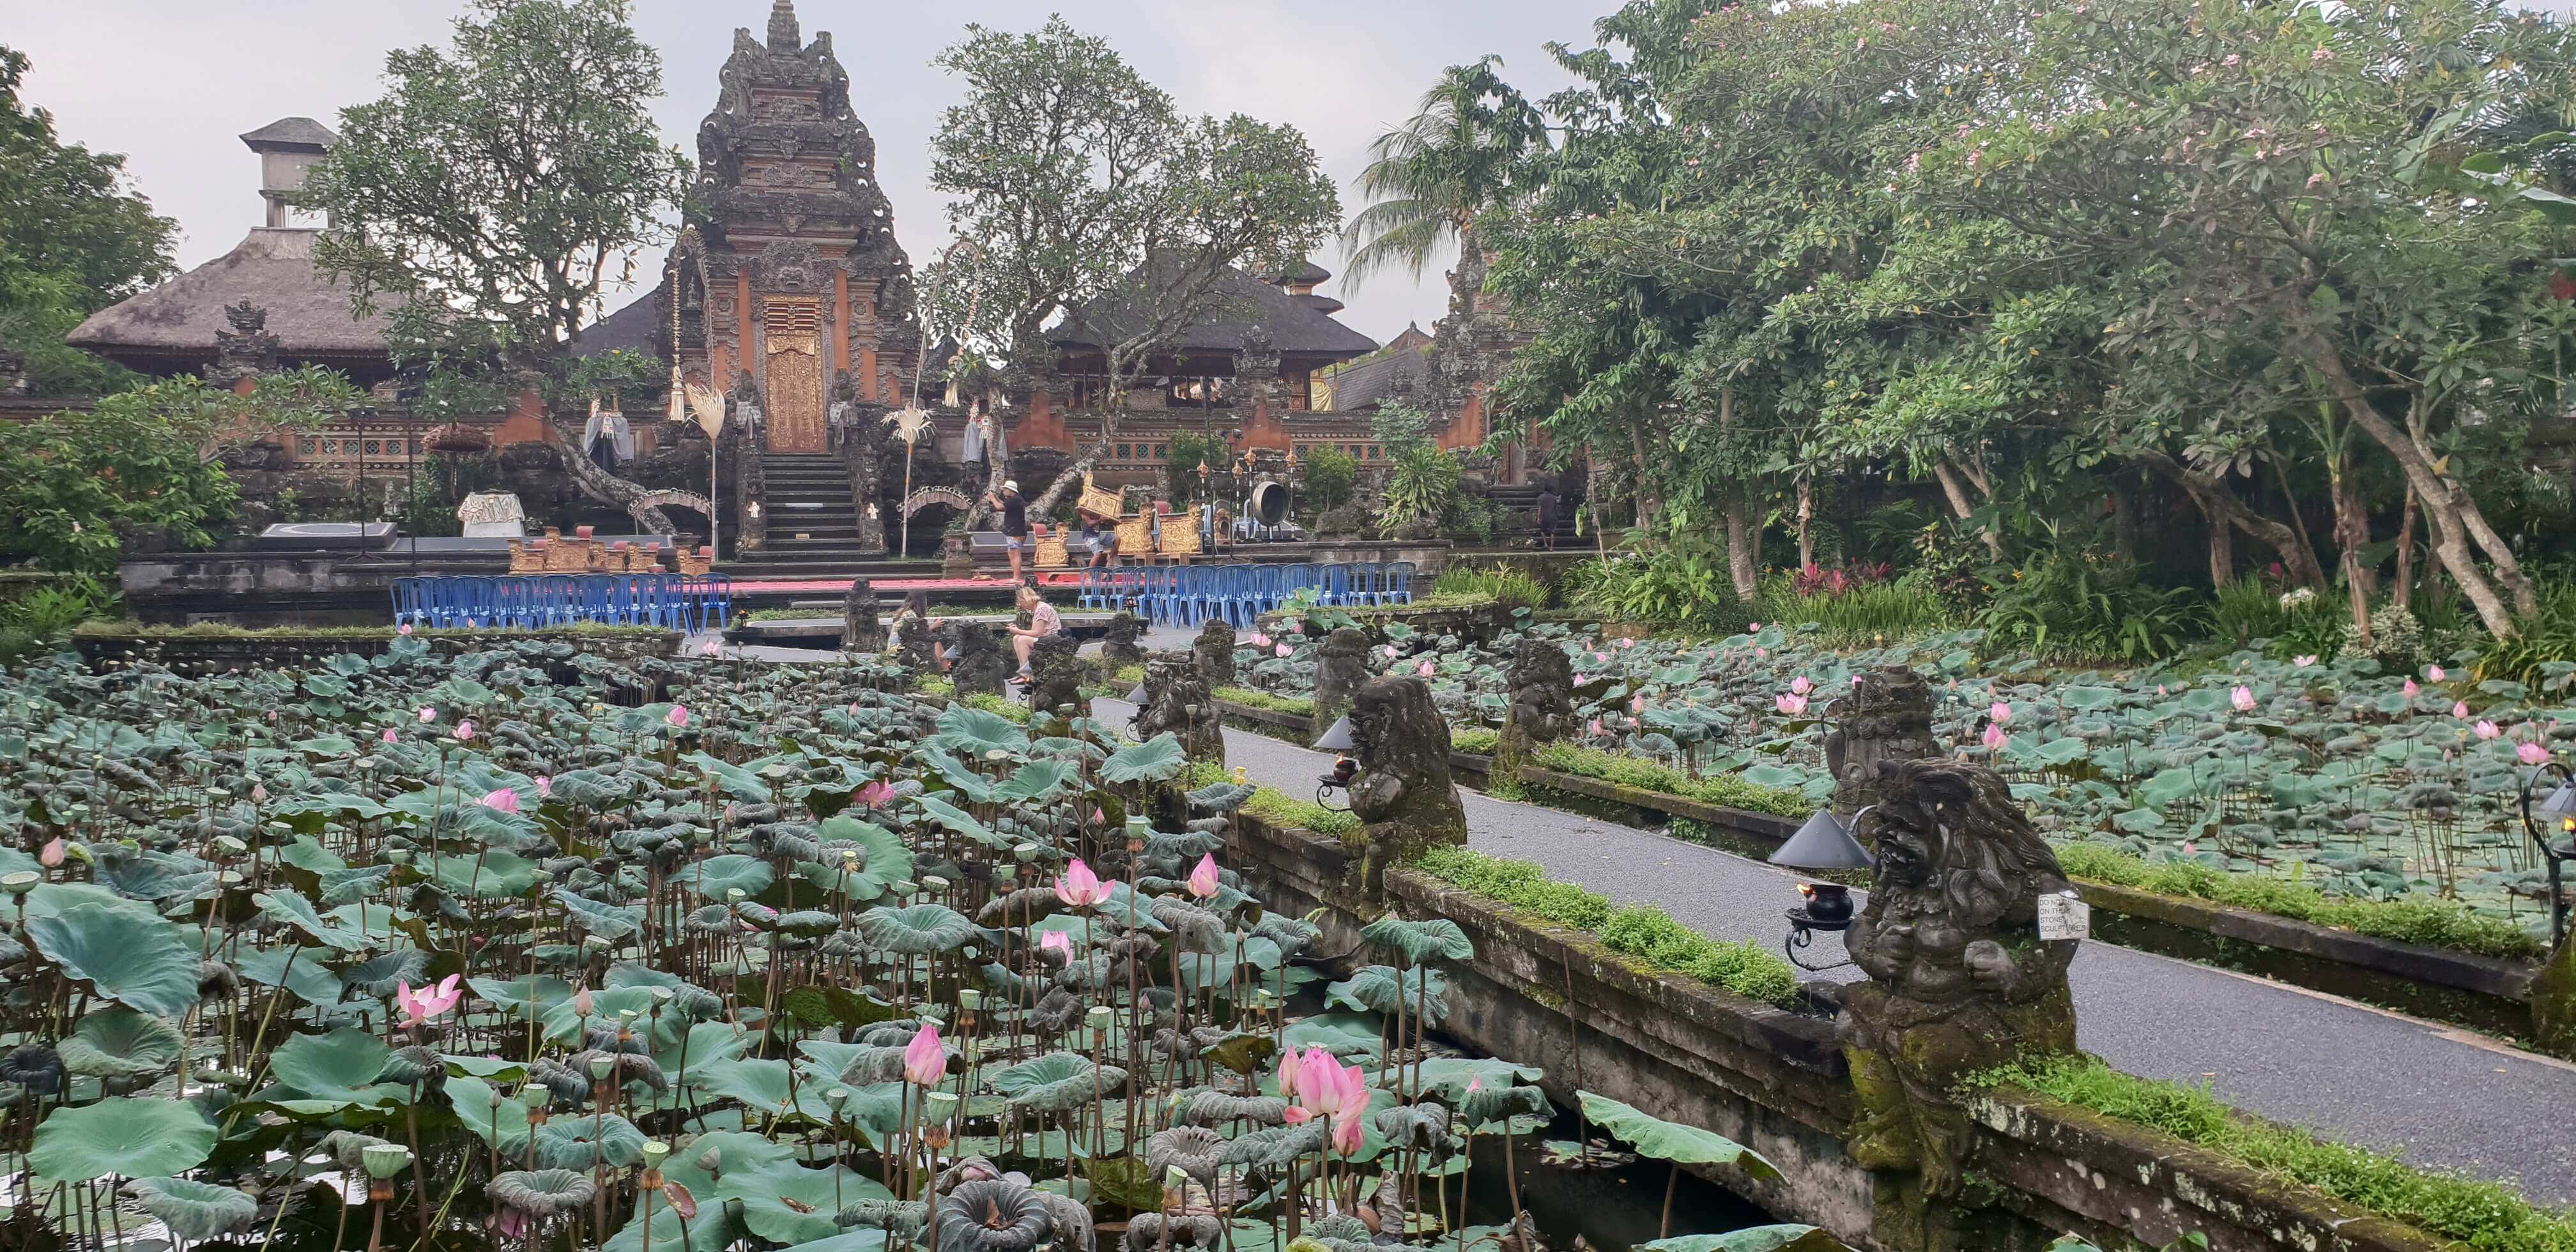 Main attraction in the temple is the stunning lotus pond on both sides of the pathway leading to the temple complex